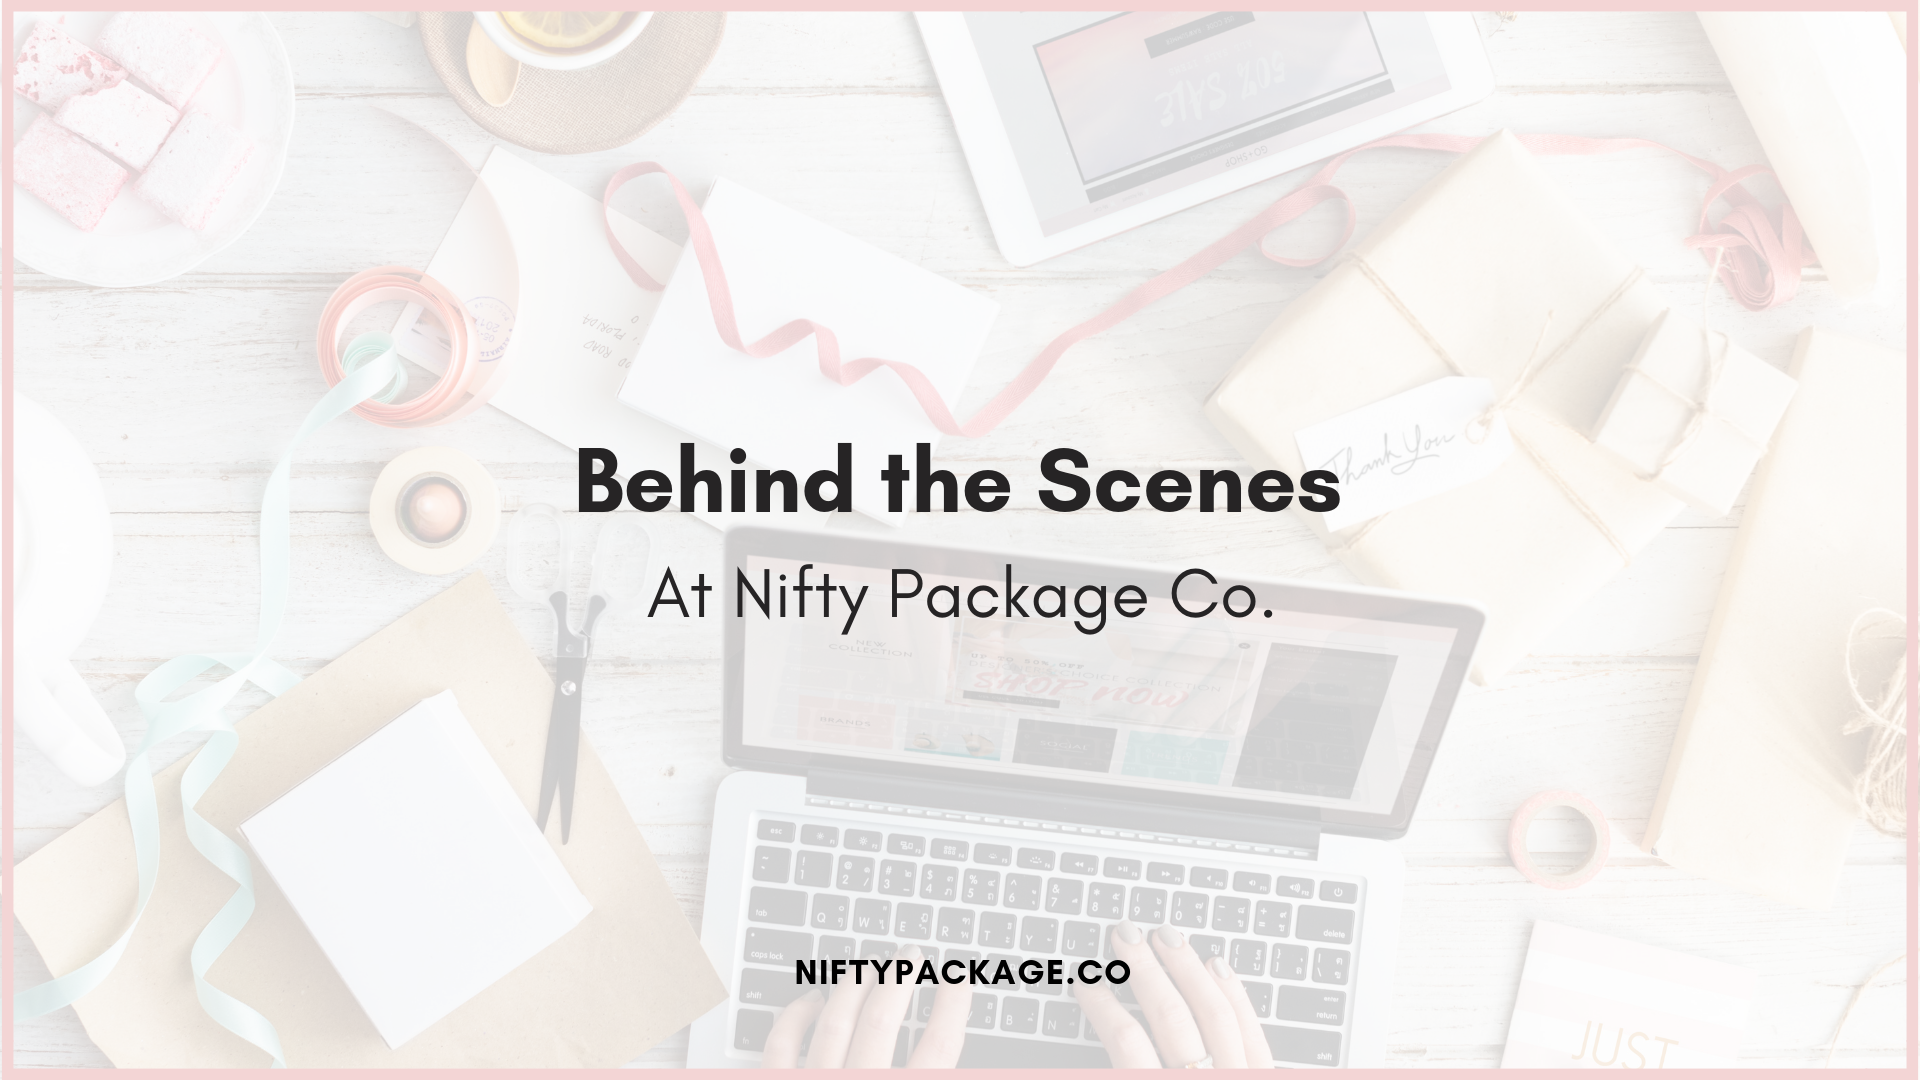 Behind the Scenes at Nifty Package Co.